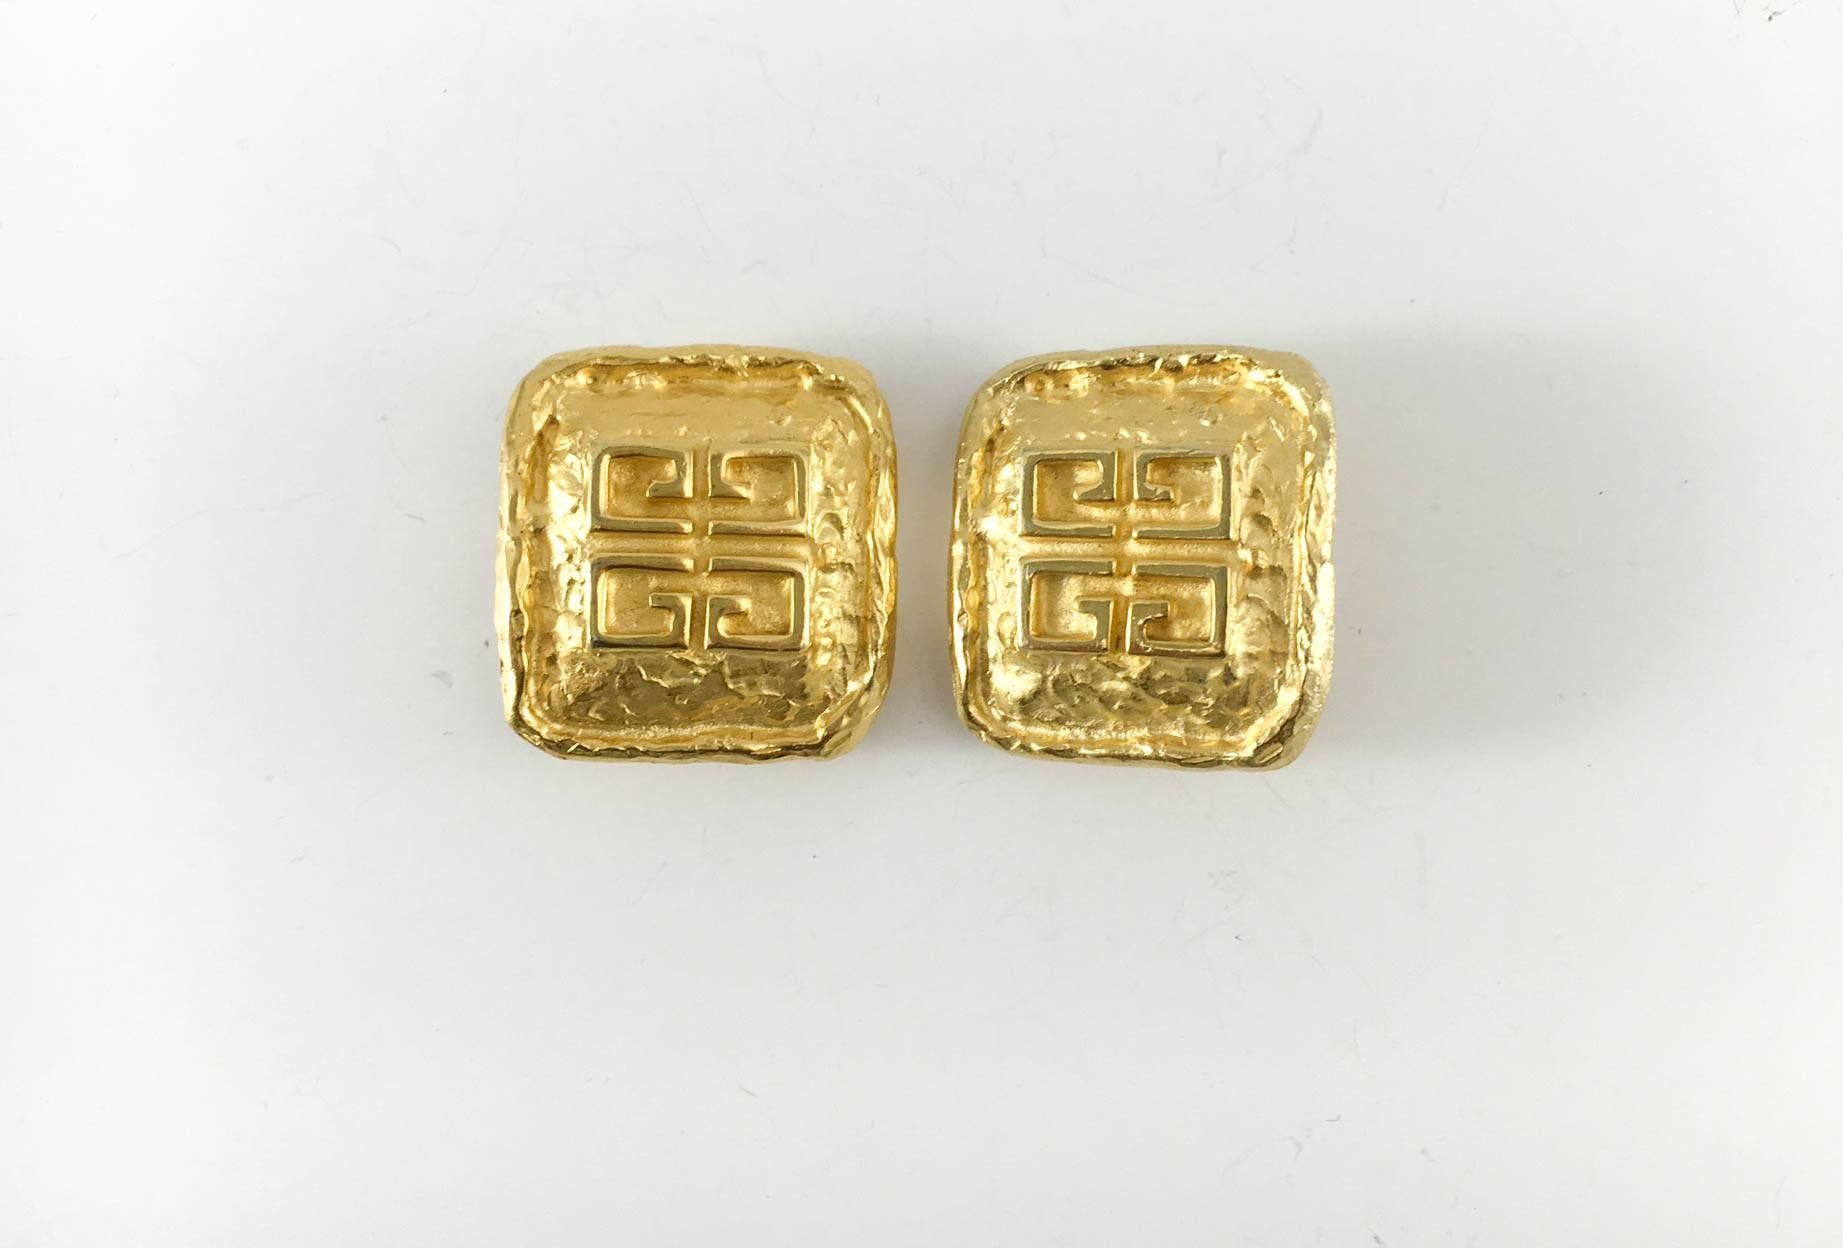 Vintage Givenchy Gold-Plated Clip-on Earrings. These very stylish pair of gold-plated Givenchy earrings feature the Givenchy logo and beautiful organic, melted gold texture. Signed Parfums of Givenchy France. The design is characteristic of iconic